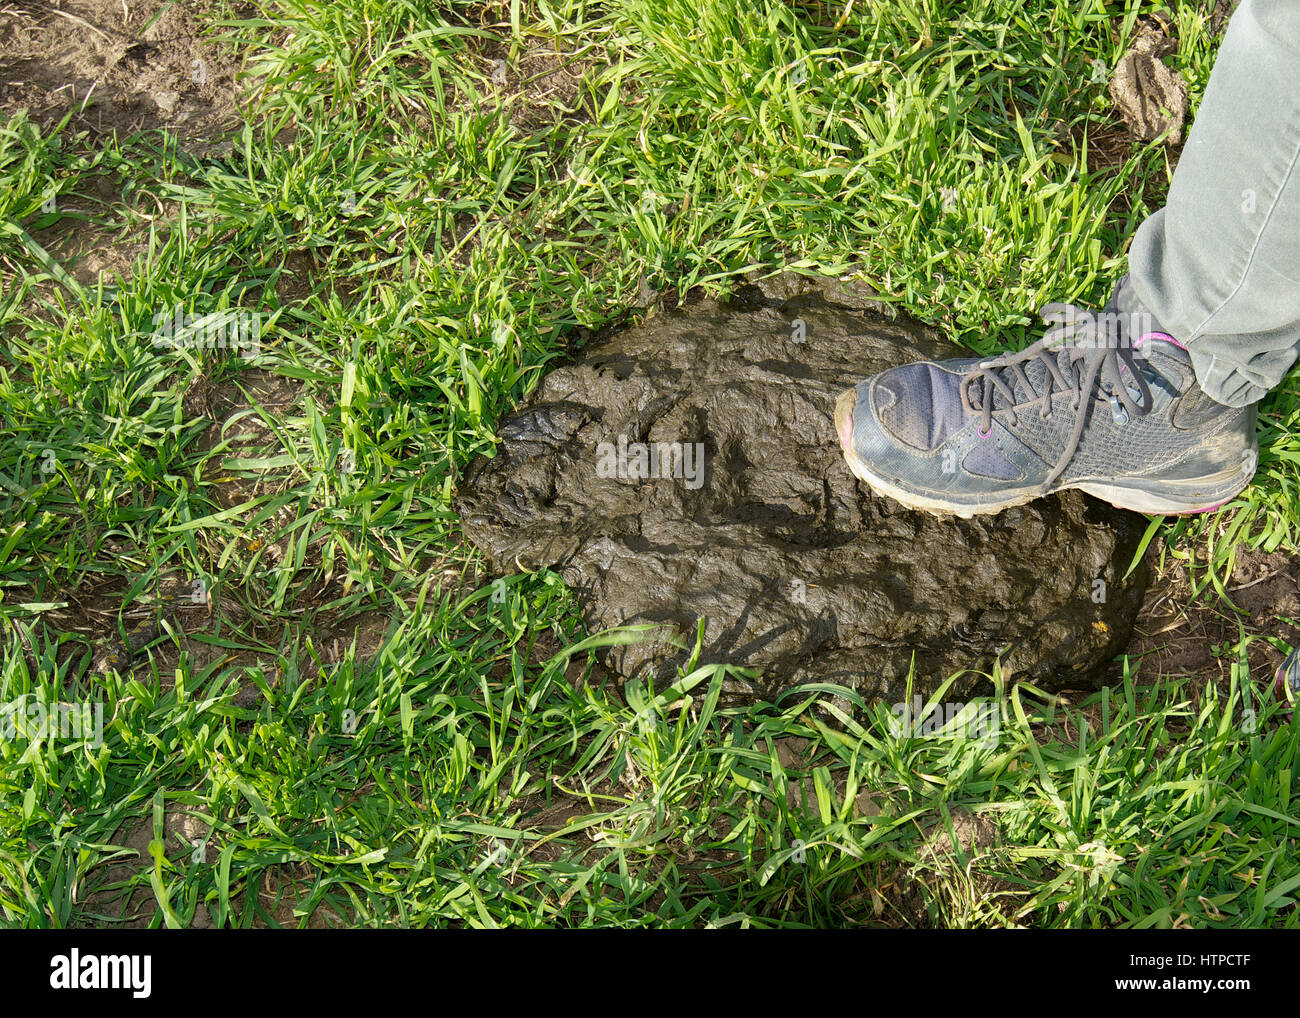 Leg And Foot Wearing Hiking Boots Stepping On Cow Dung Stock Photo